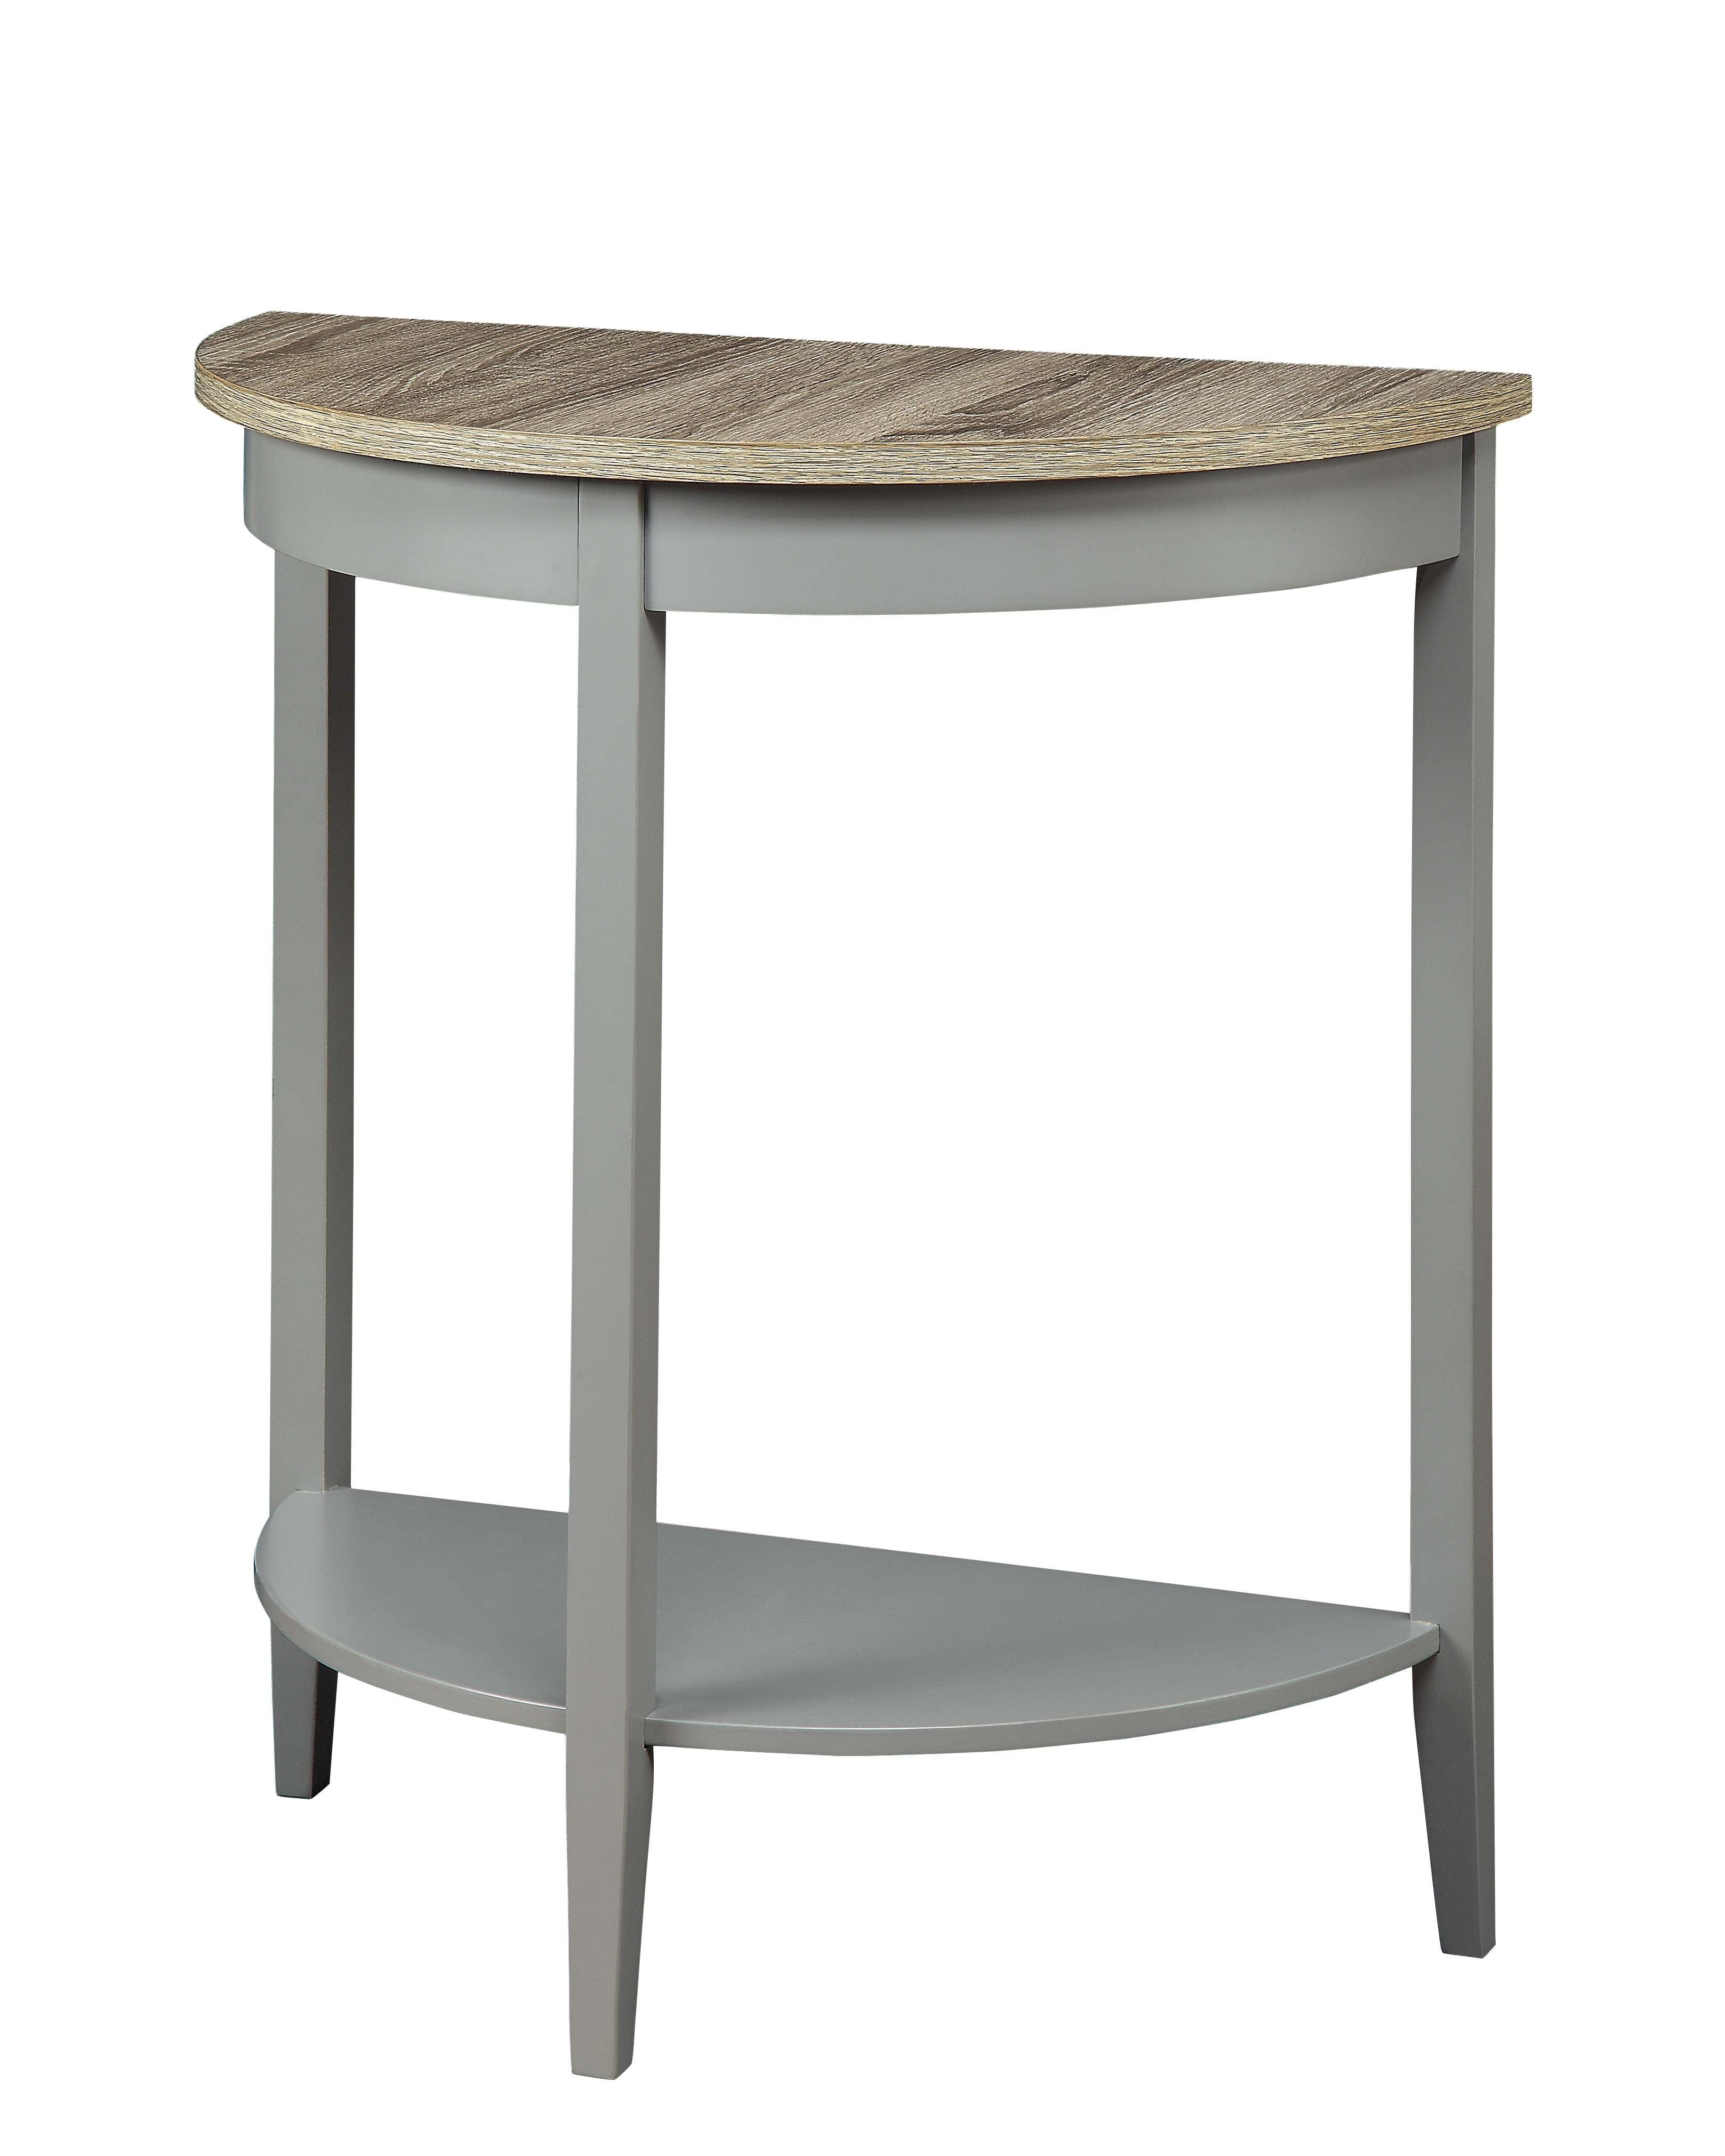 Contemporary Demilune Wooden Console Table with Open Shelf in Gray Oak